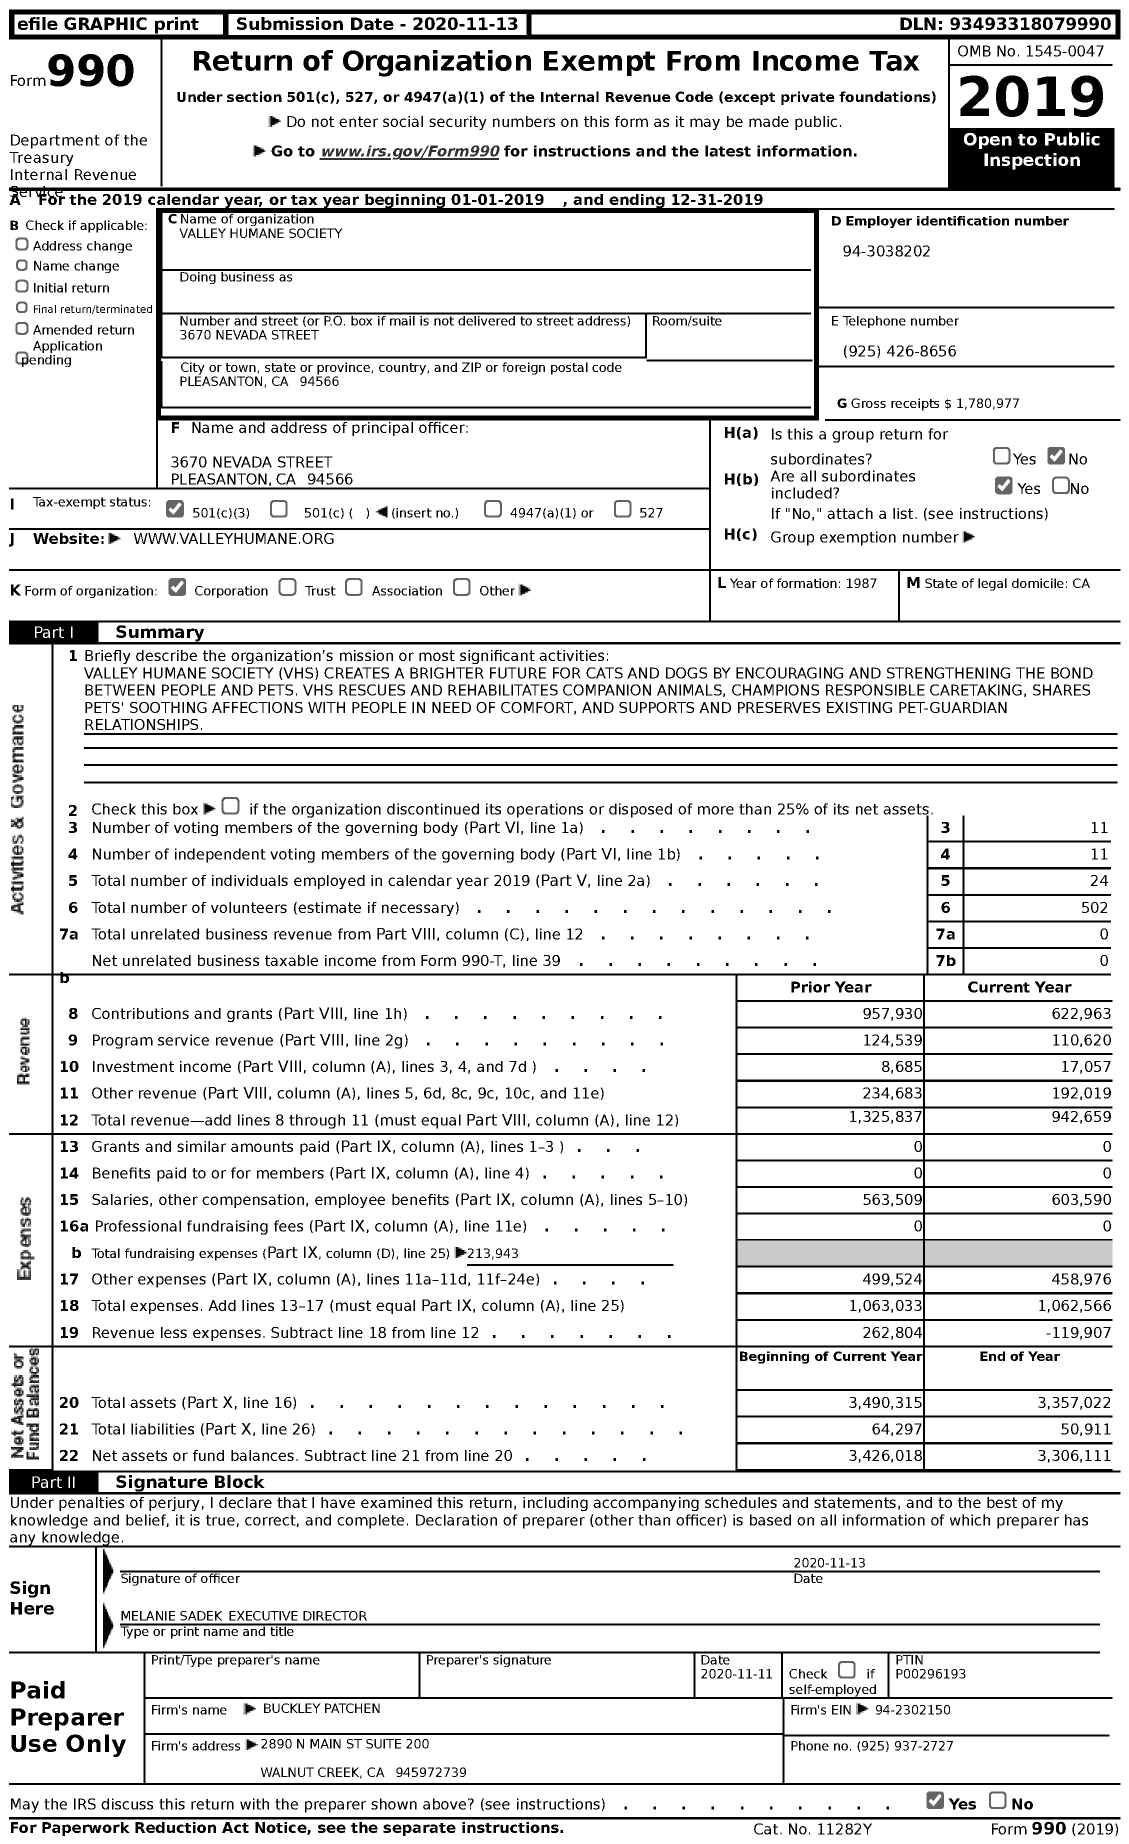 Image of first page of 2019 Form 990 for Valley Humane Society (VHS)